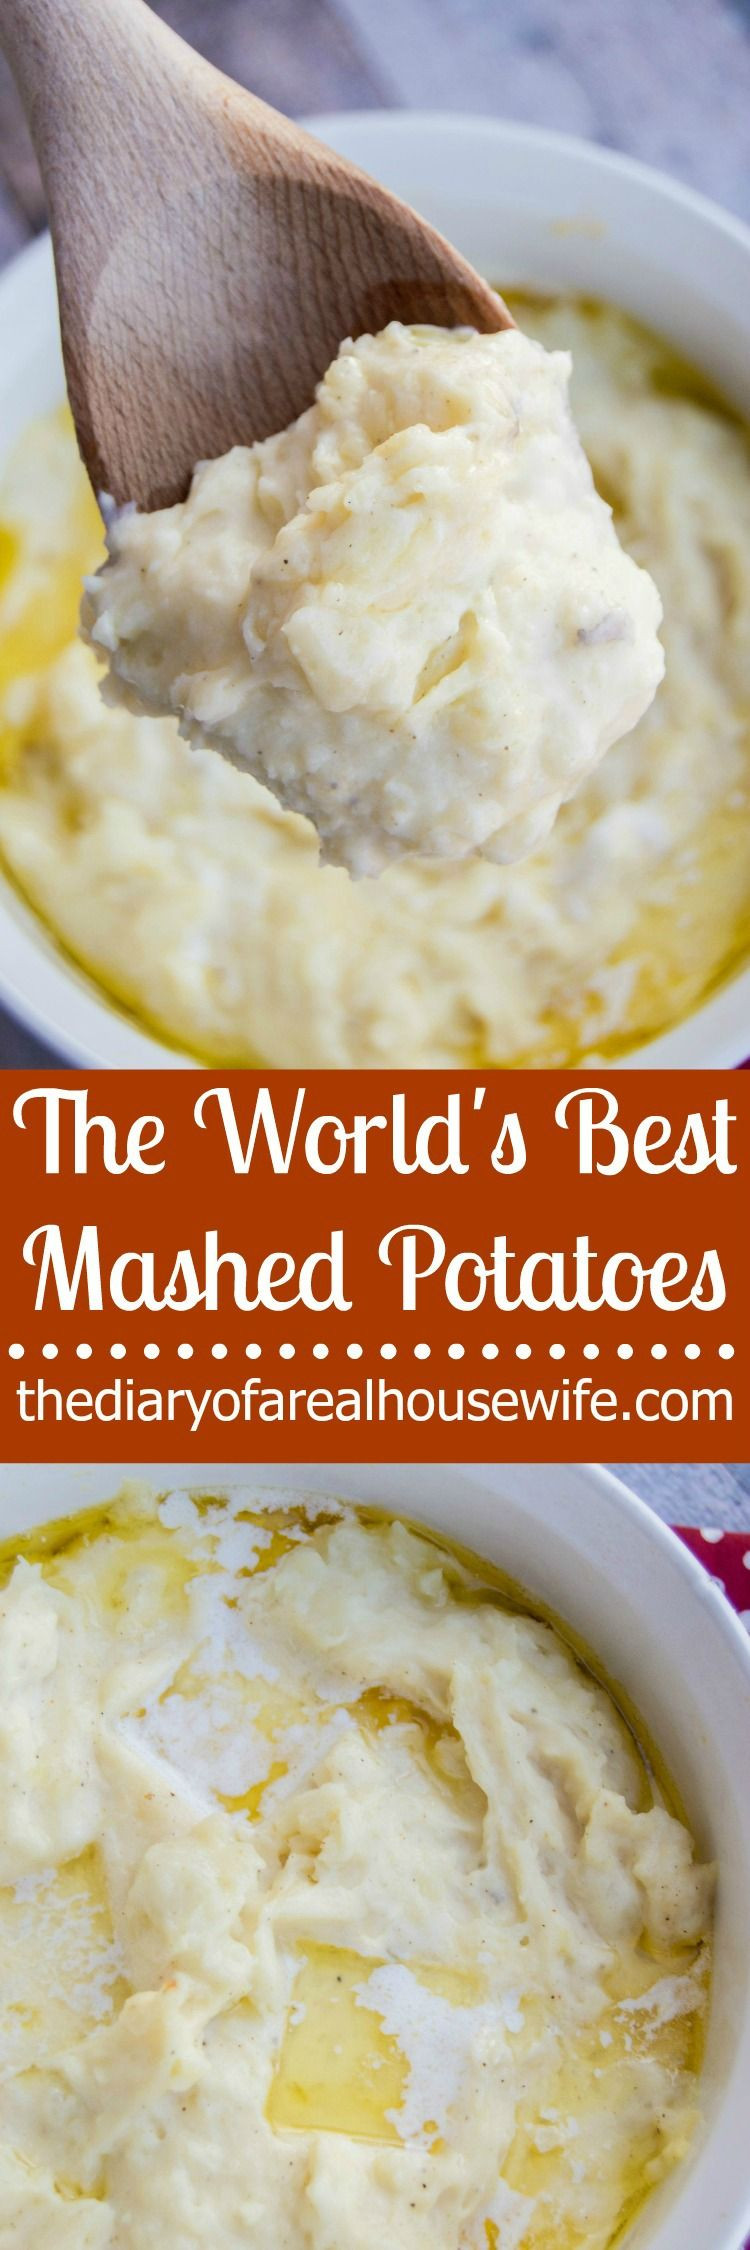 Best Mashed Potatoes For Thanksgiving
 If you need a good recipe for Thanksgiving you will want